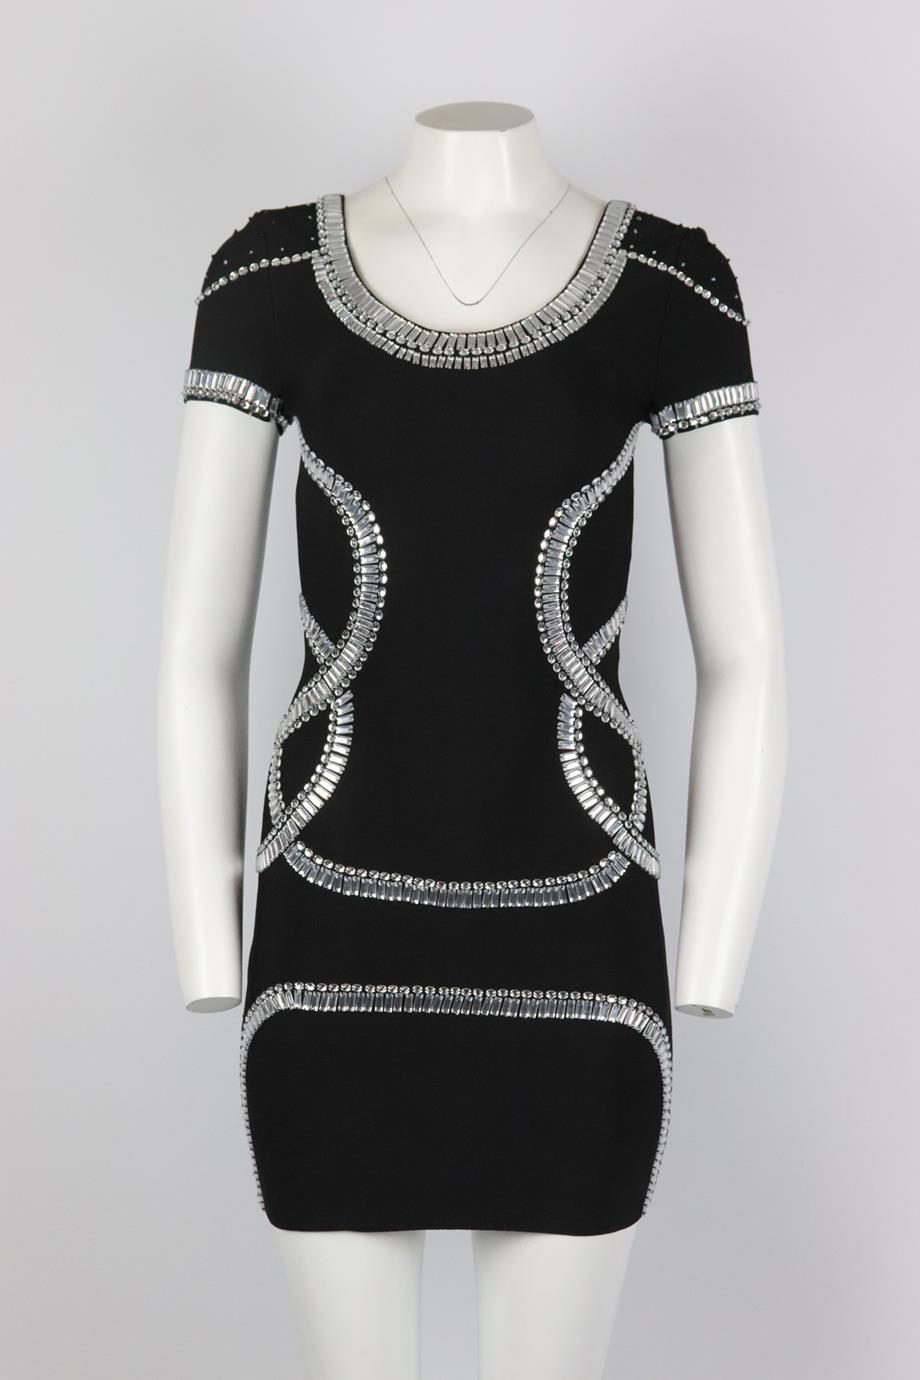 Herve Leger embellished stretch knit mini dress. Black. Short sleeve, scoop neck. Zip fastening at back. 90% Rayon, 9% nylon, 1% spandex. Size: Small (UK 8, US 4, FR 36, IT 40). Bust: 30 in. Waist: 28 in. Hips: 34 in. Length: 31 in. Very good